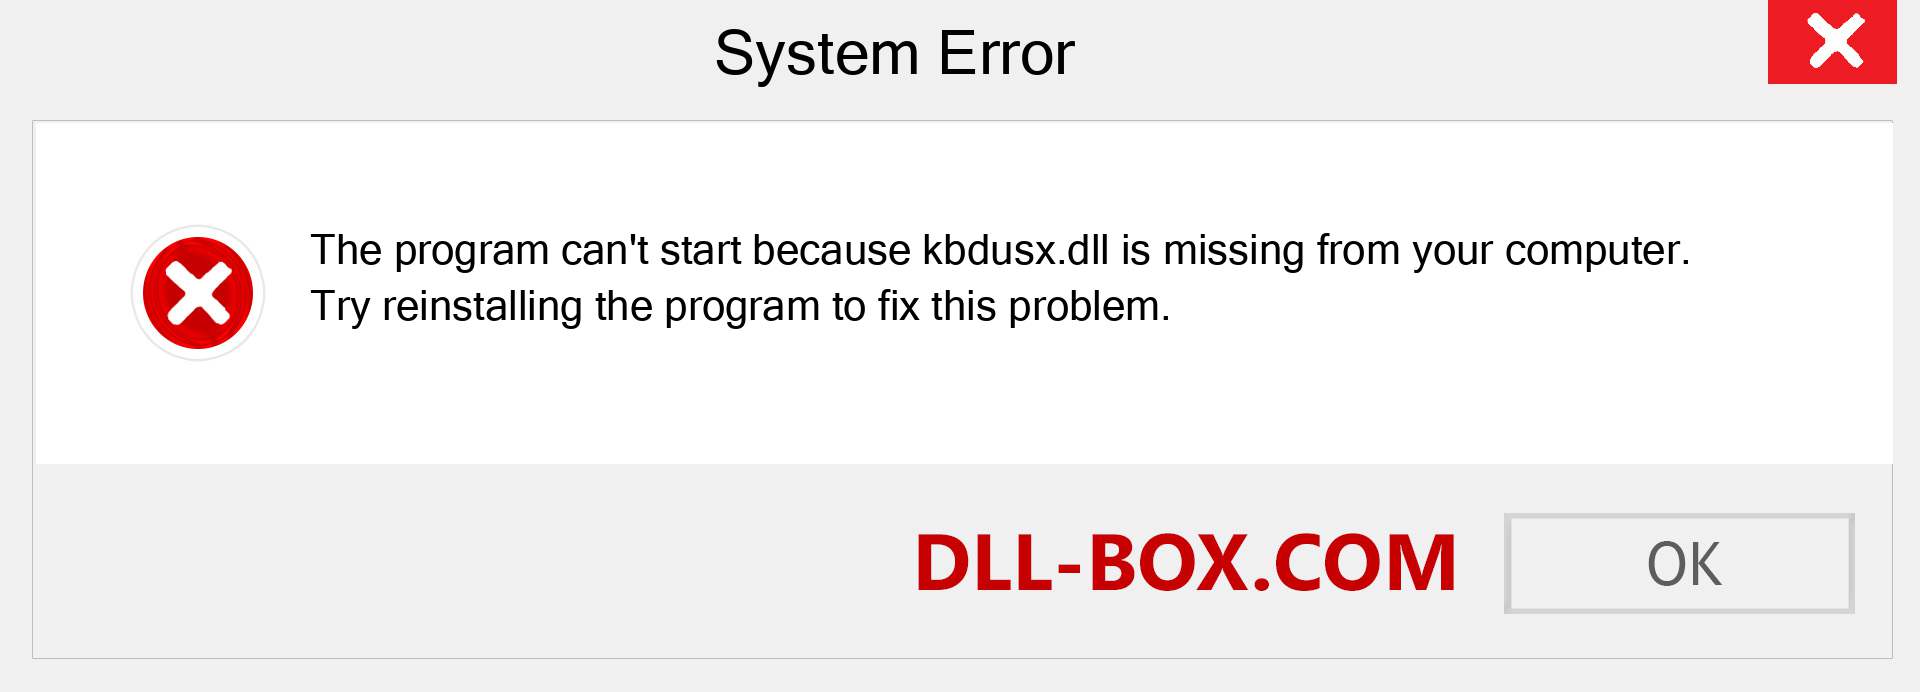  kbdusx.dll file is missing?. Download for Windows 7, 8, 10 - Fix  kbdusx dll Missing Error on Windows, photos, images